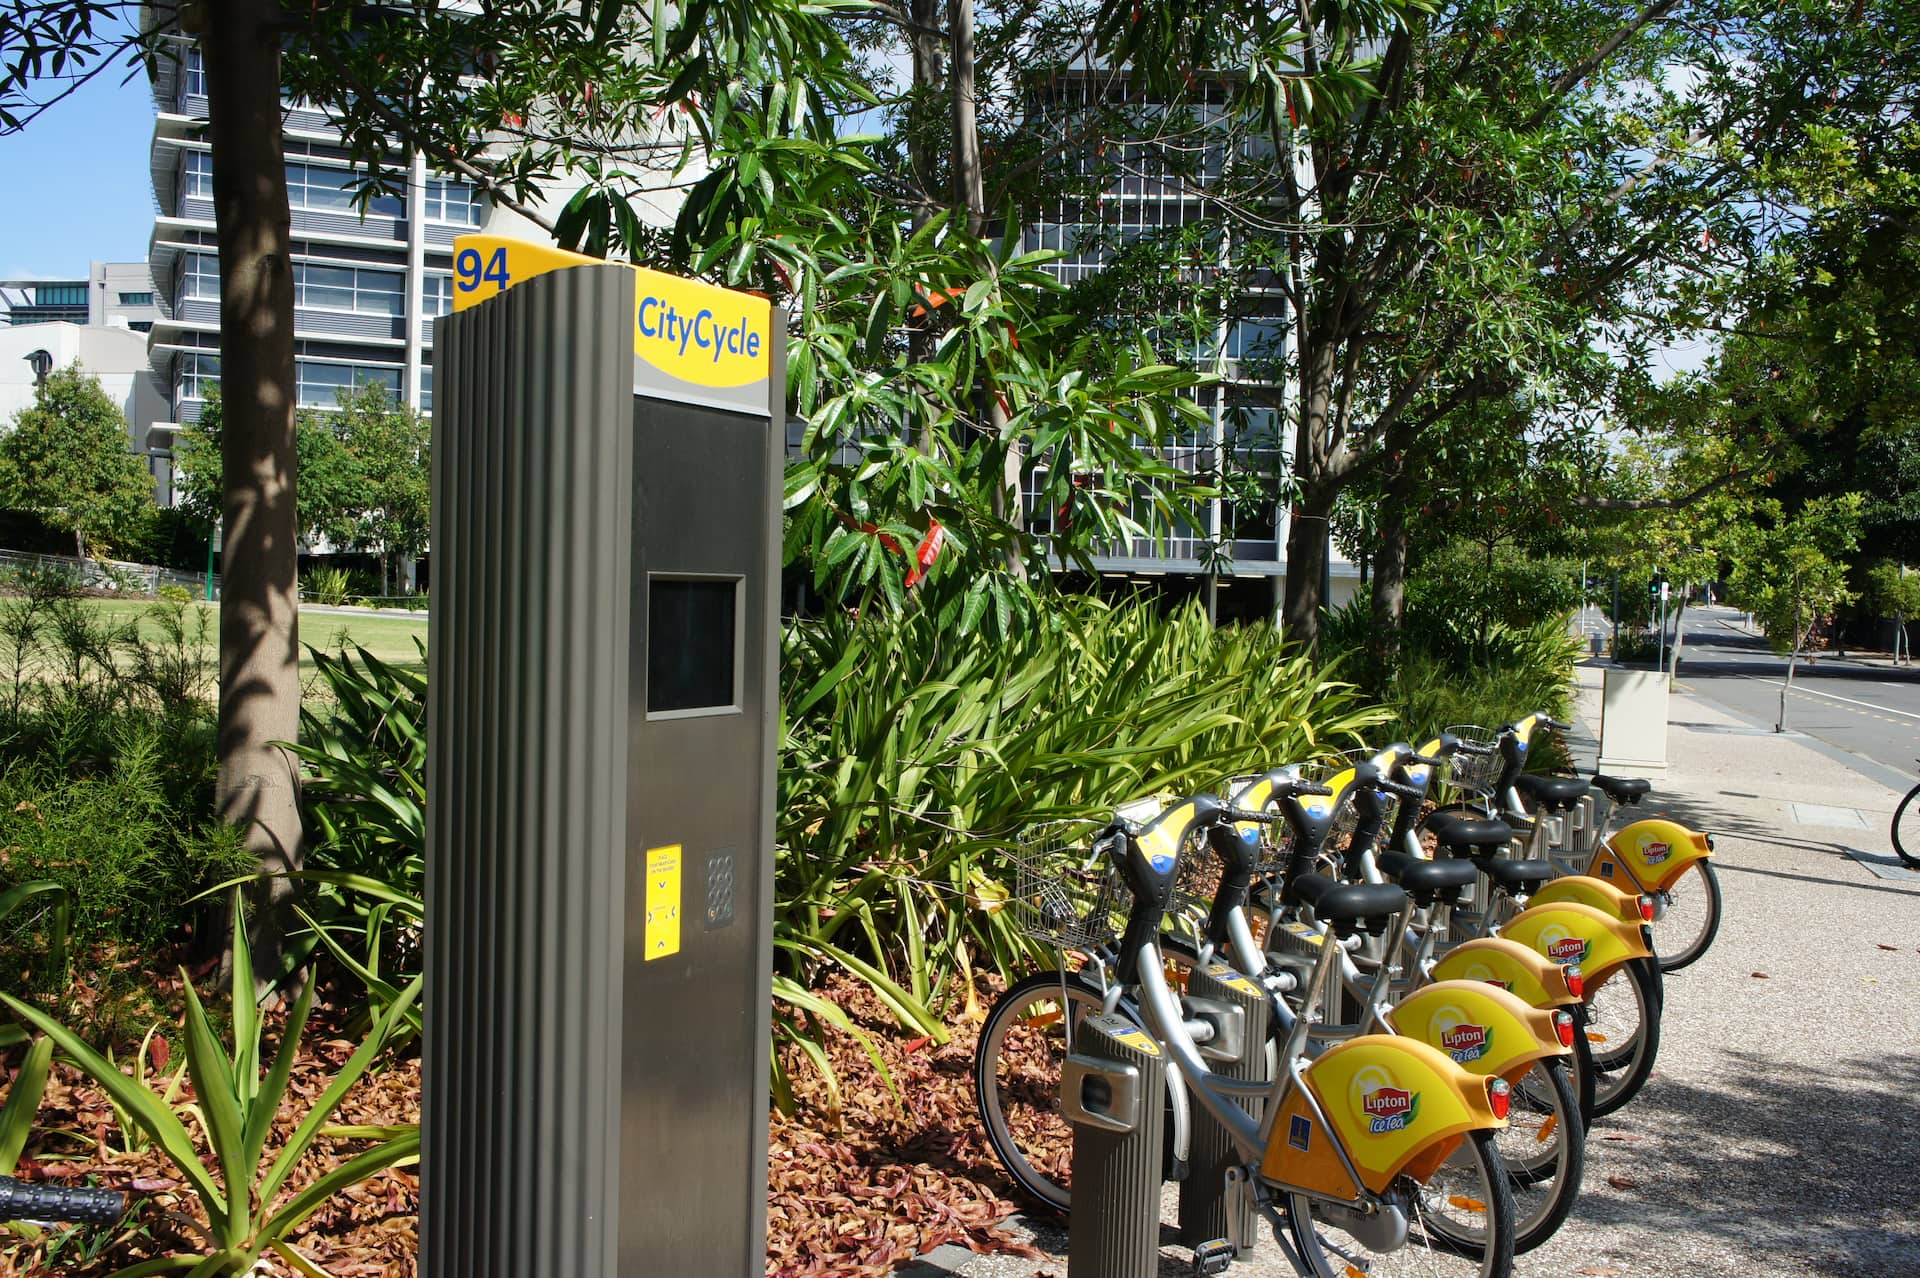 Glenelg St / Merivale St CityCycle Station. A pylon with a screen and buttons, with yellow Lipton bikes spread off to the horizon.